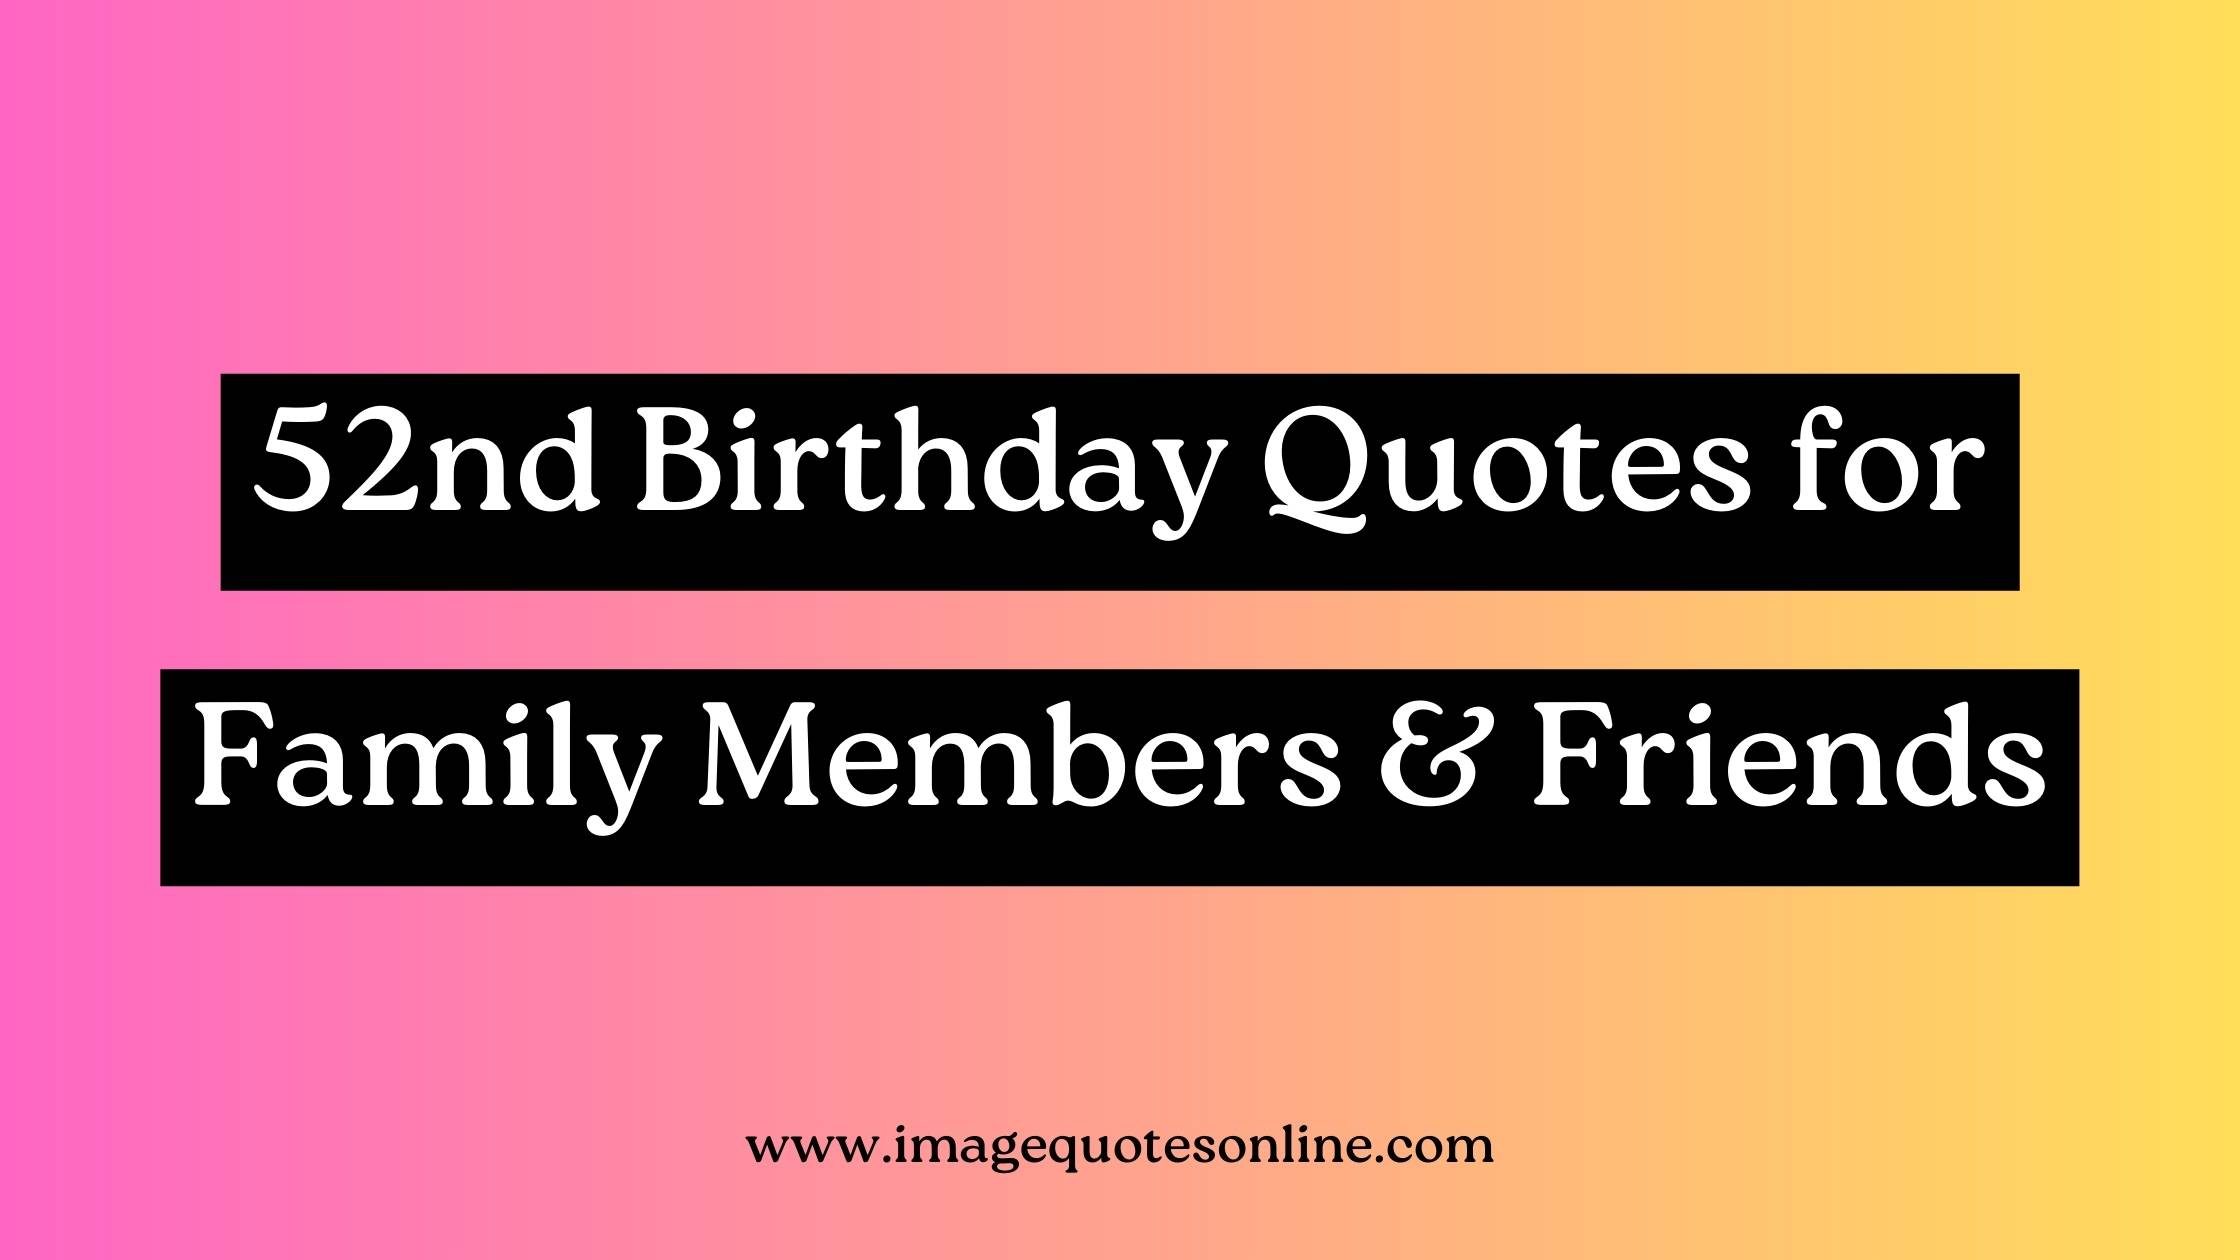 52nd Birthday Quotes